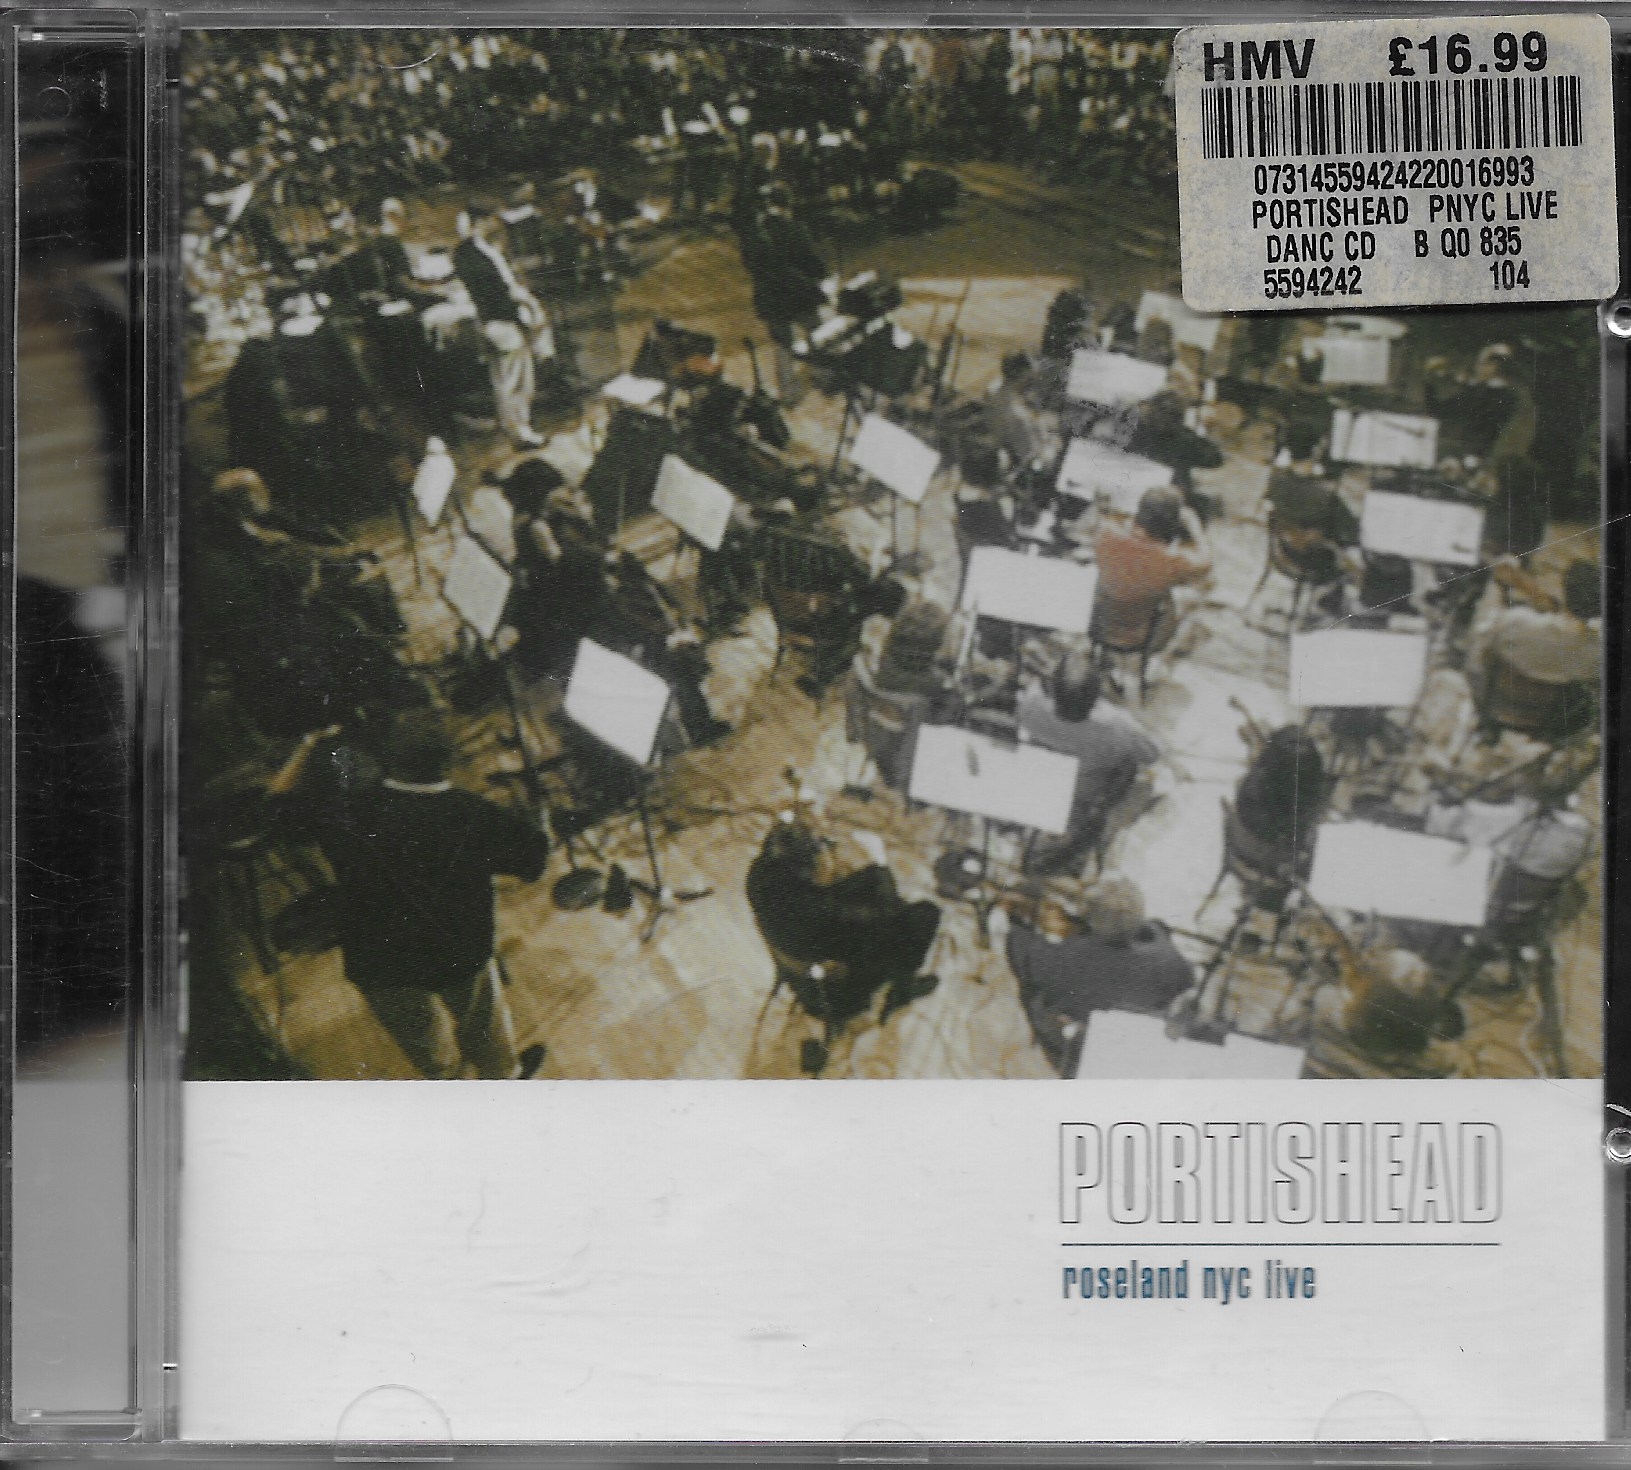 Picture of 559446 - 2 Roseland NYC - Live by artist Portishead